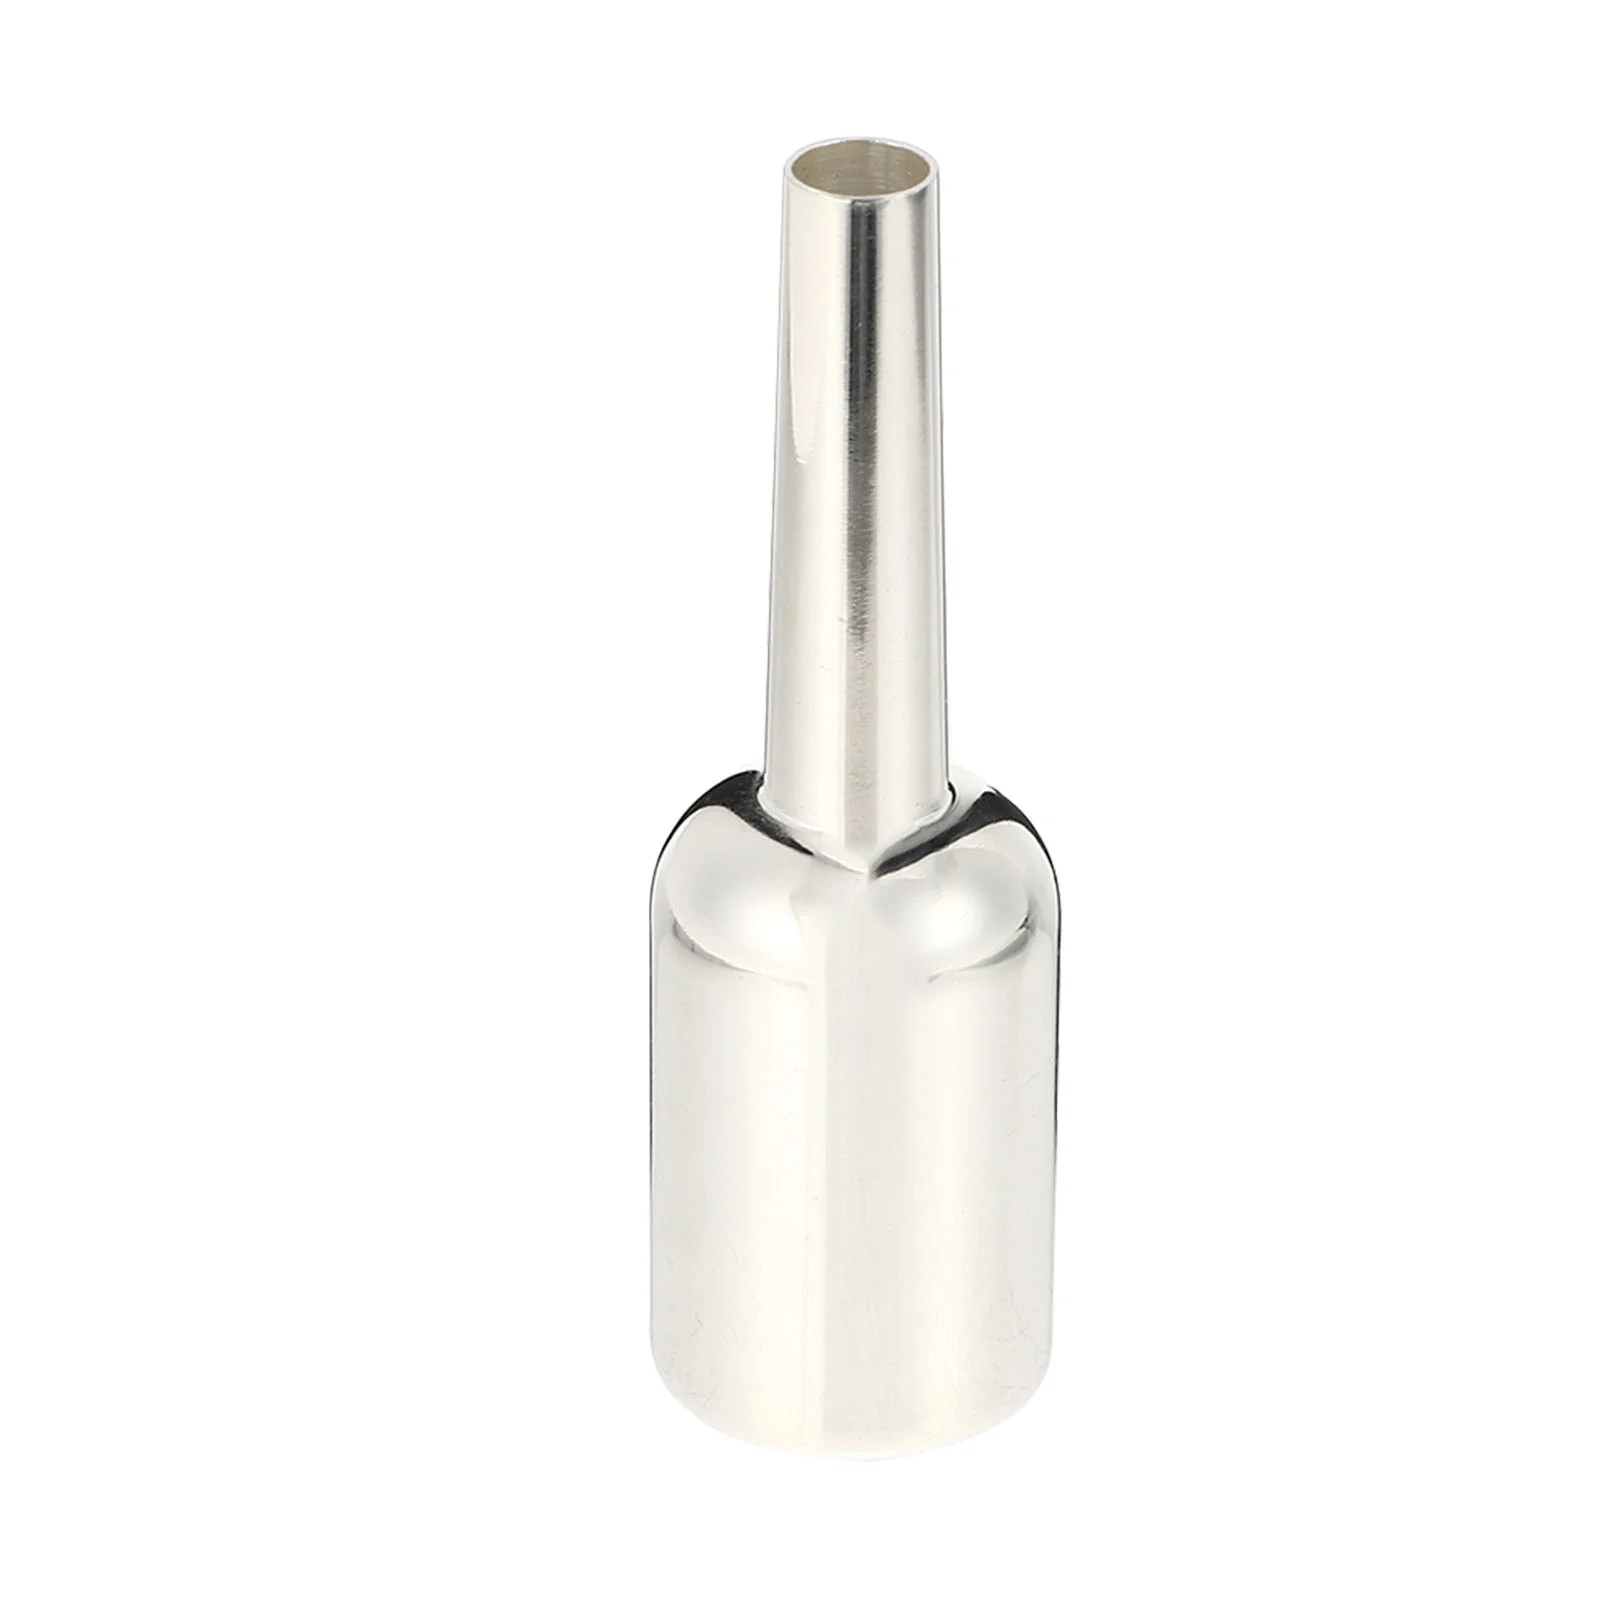 

Trumpet Mouthpiece Music Instrument Accessories Silvering Accessory Small Supply British Musical Instruments Beginners